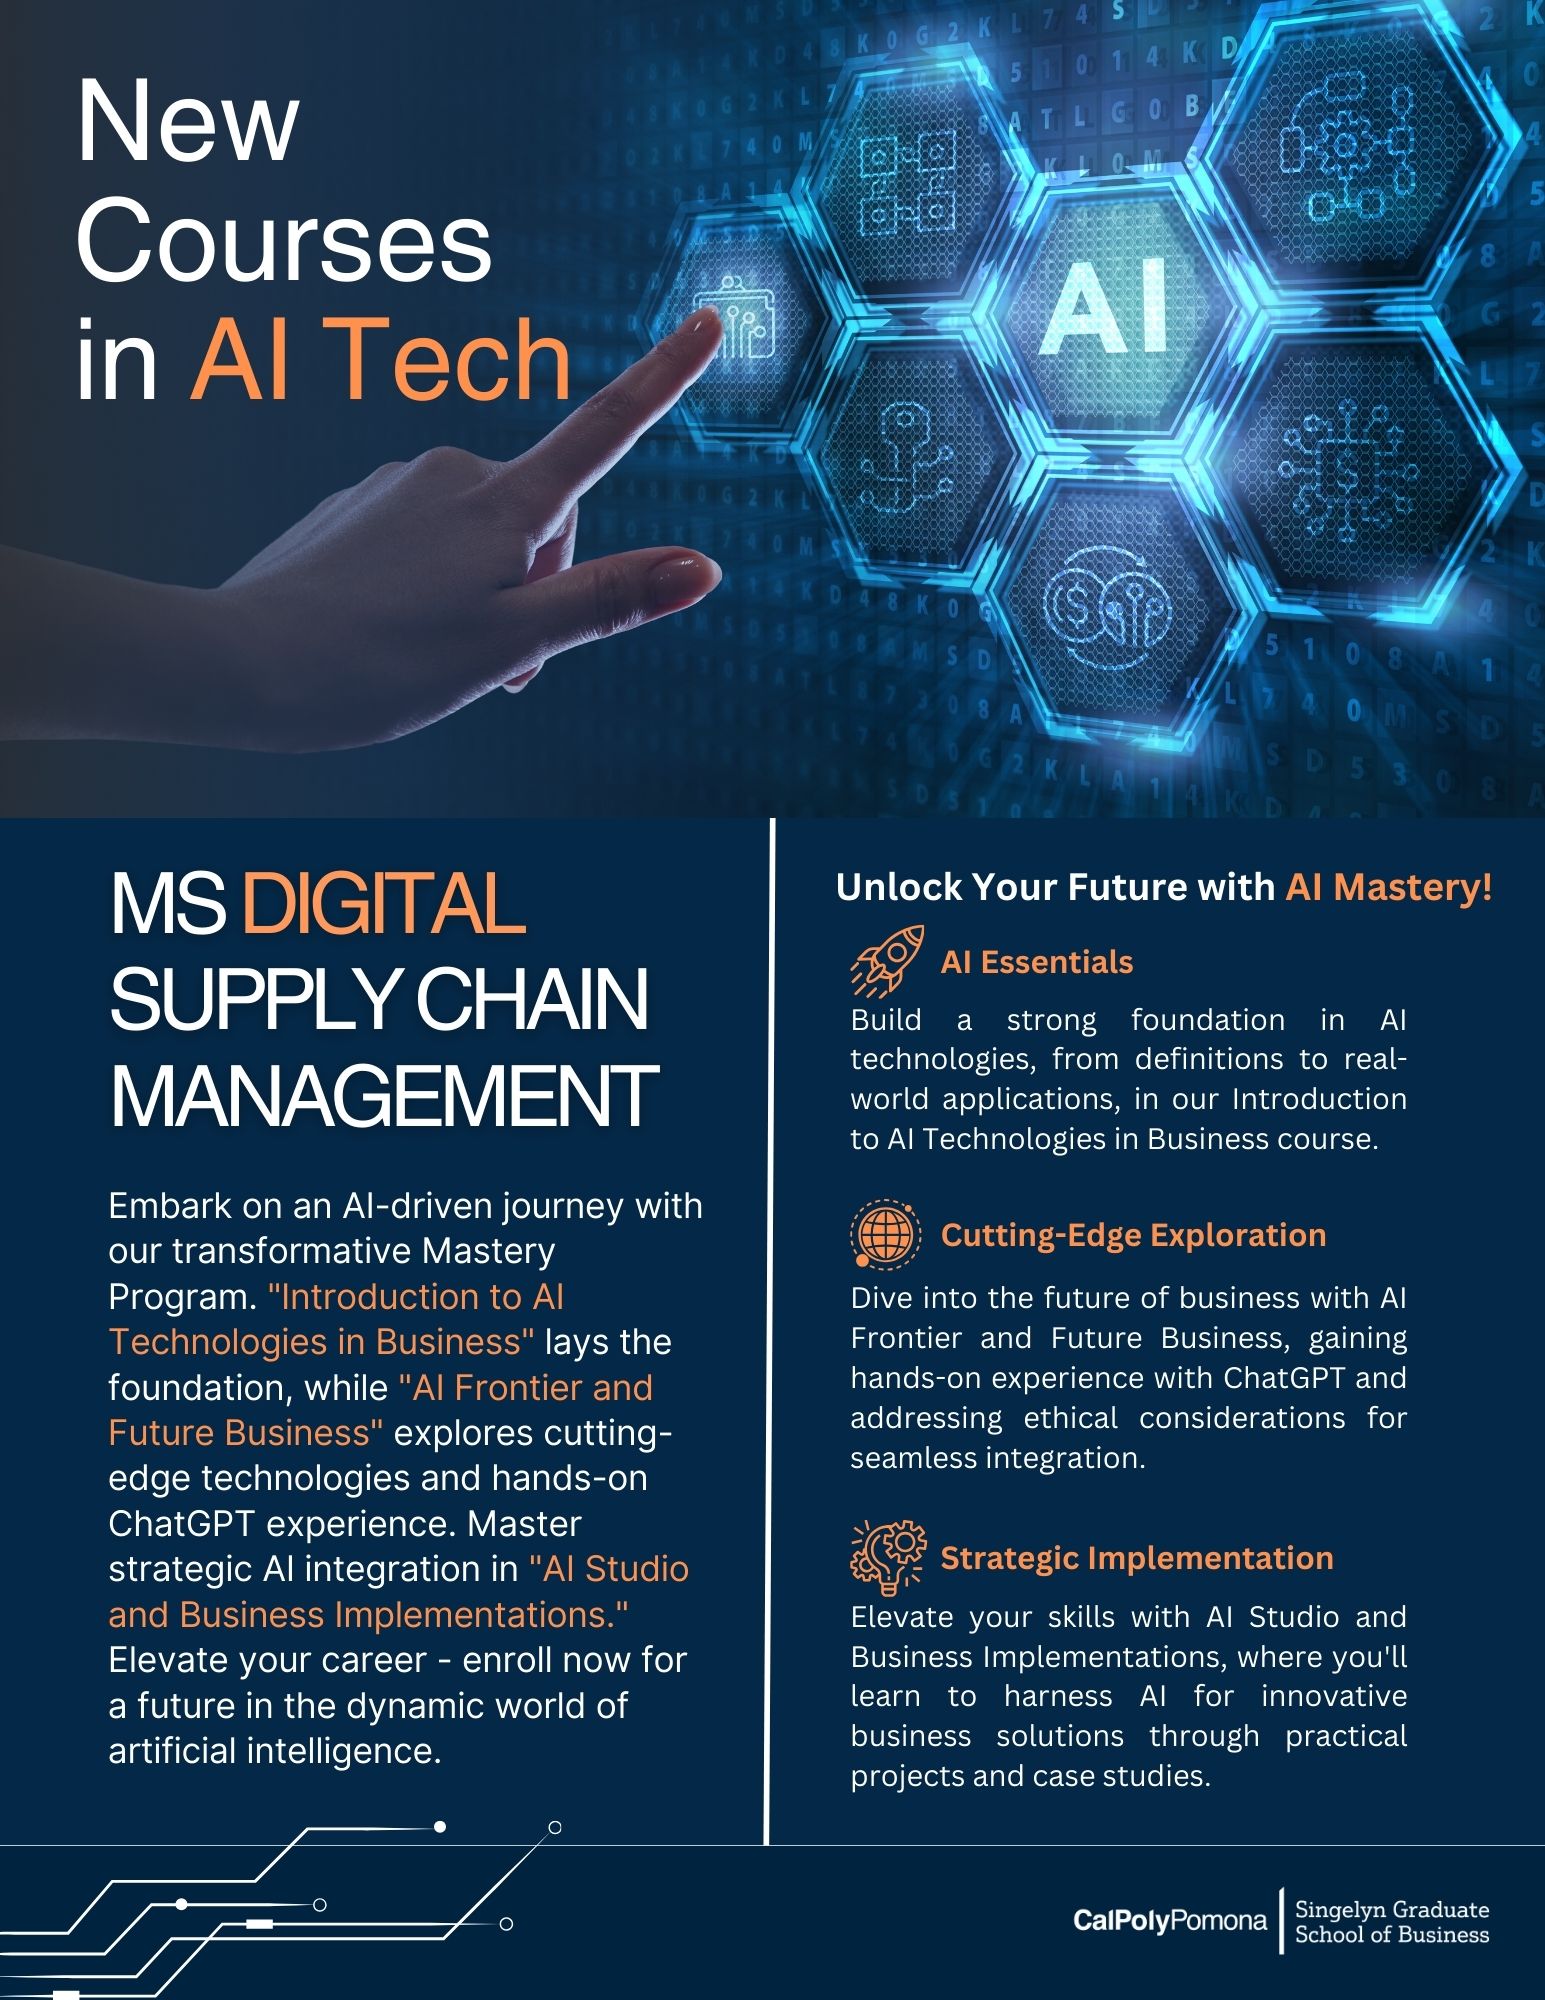 Technology and Operations Management &amp; E Business Department.  MS Digital Supply Chain Management.  Now Accepting Applications Fall Cohort 2022.  Competitive Tuition. Stem Program. Accelerated Roadmap Option. Networking with Industry Partners. Transformative Digital Tools - Blockchain, RPA,  &amp; SAP.  Join the next generation of business professionals as they gain transformative insights of contemporary digital supply chain management